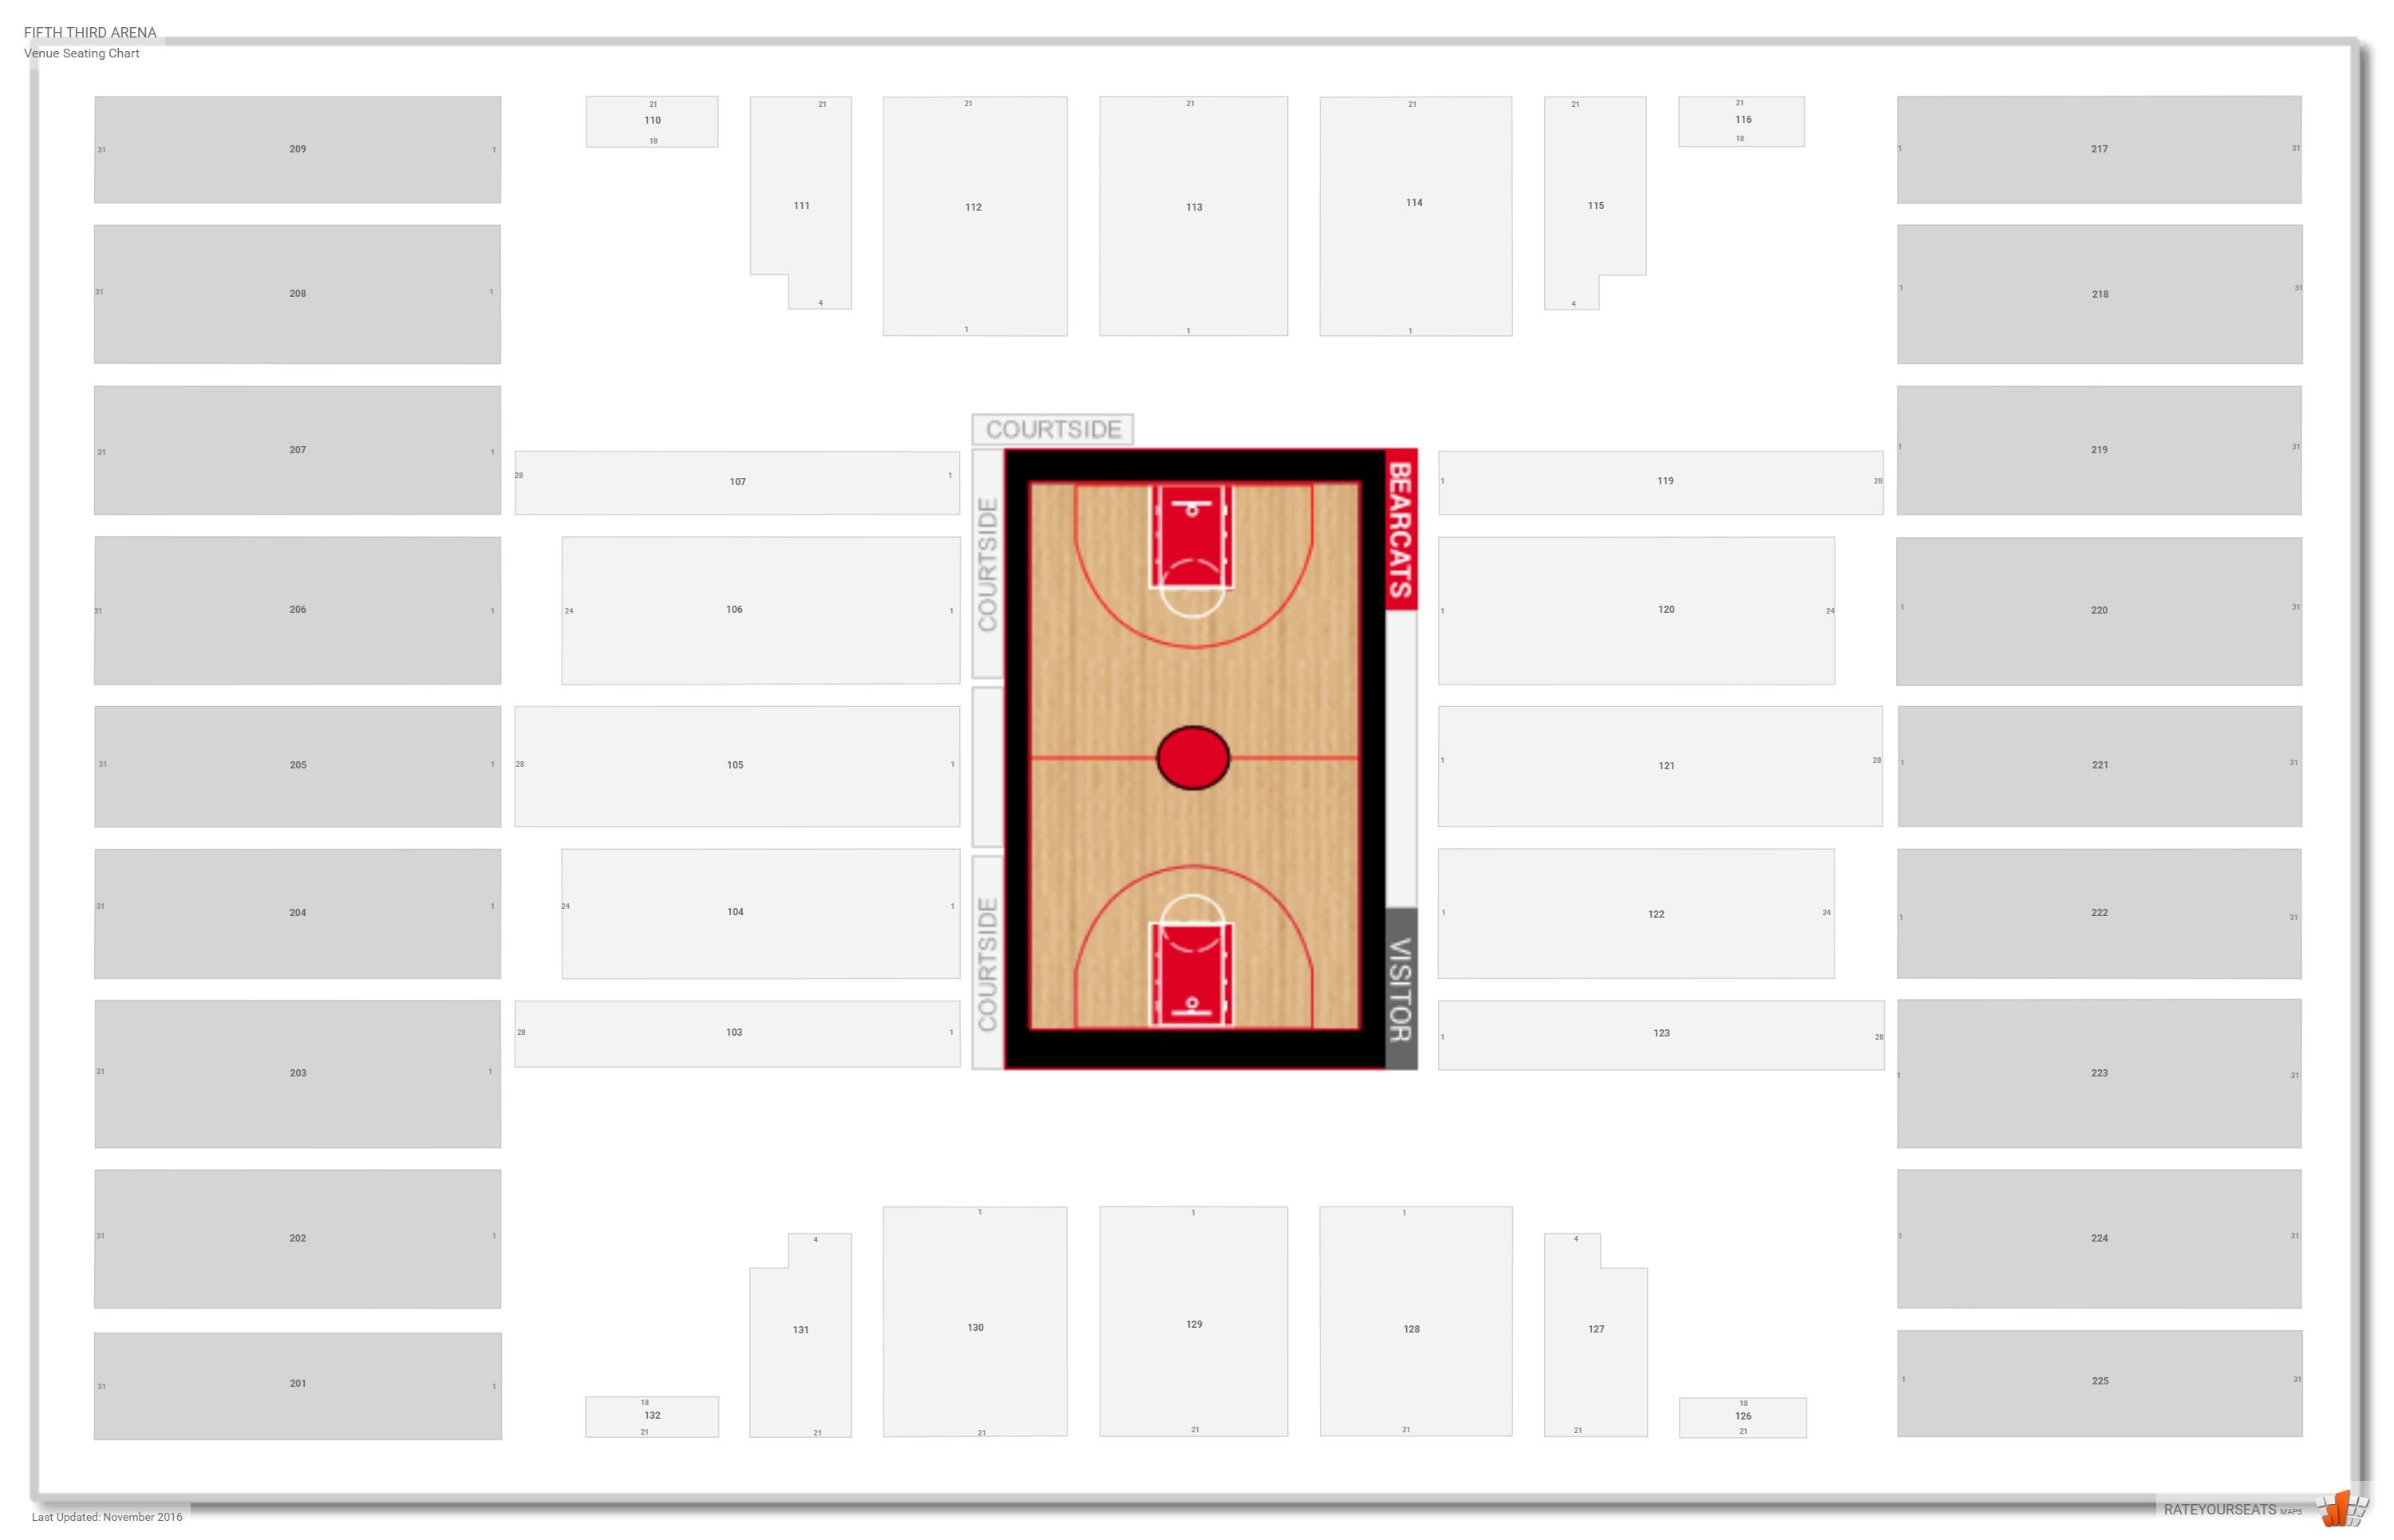 Fifth Third Arena Seating Chart: A Visual Reference of Charts | Chart ...